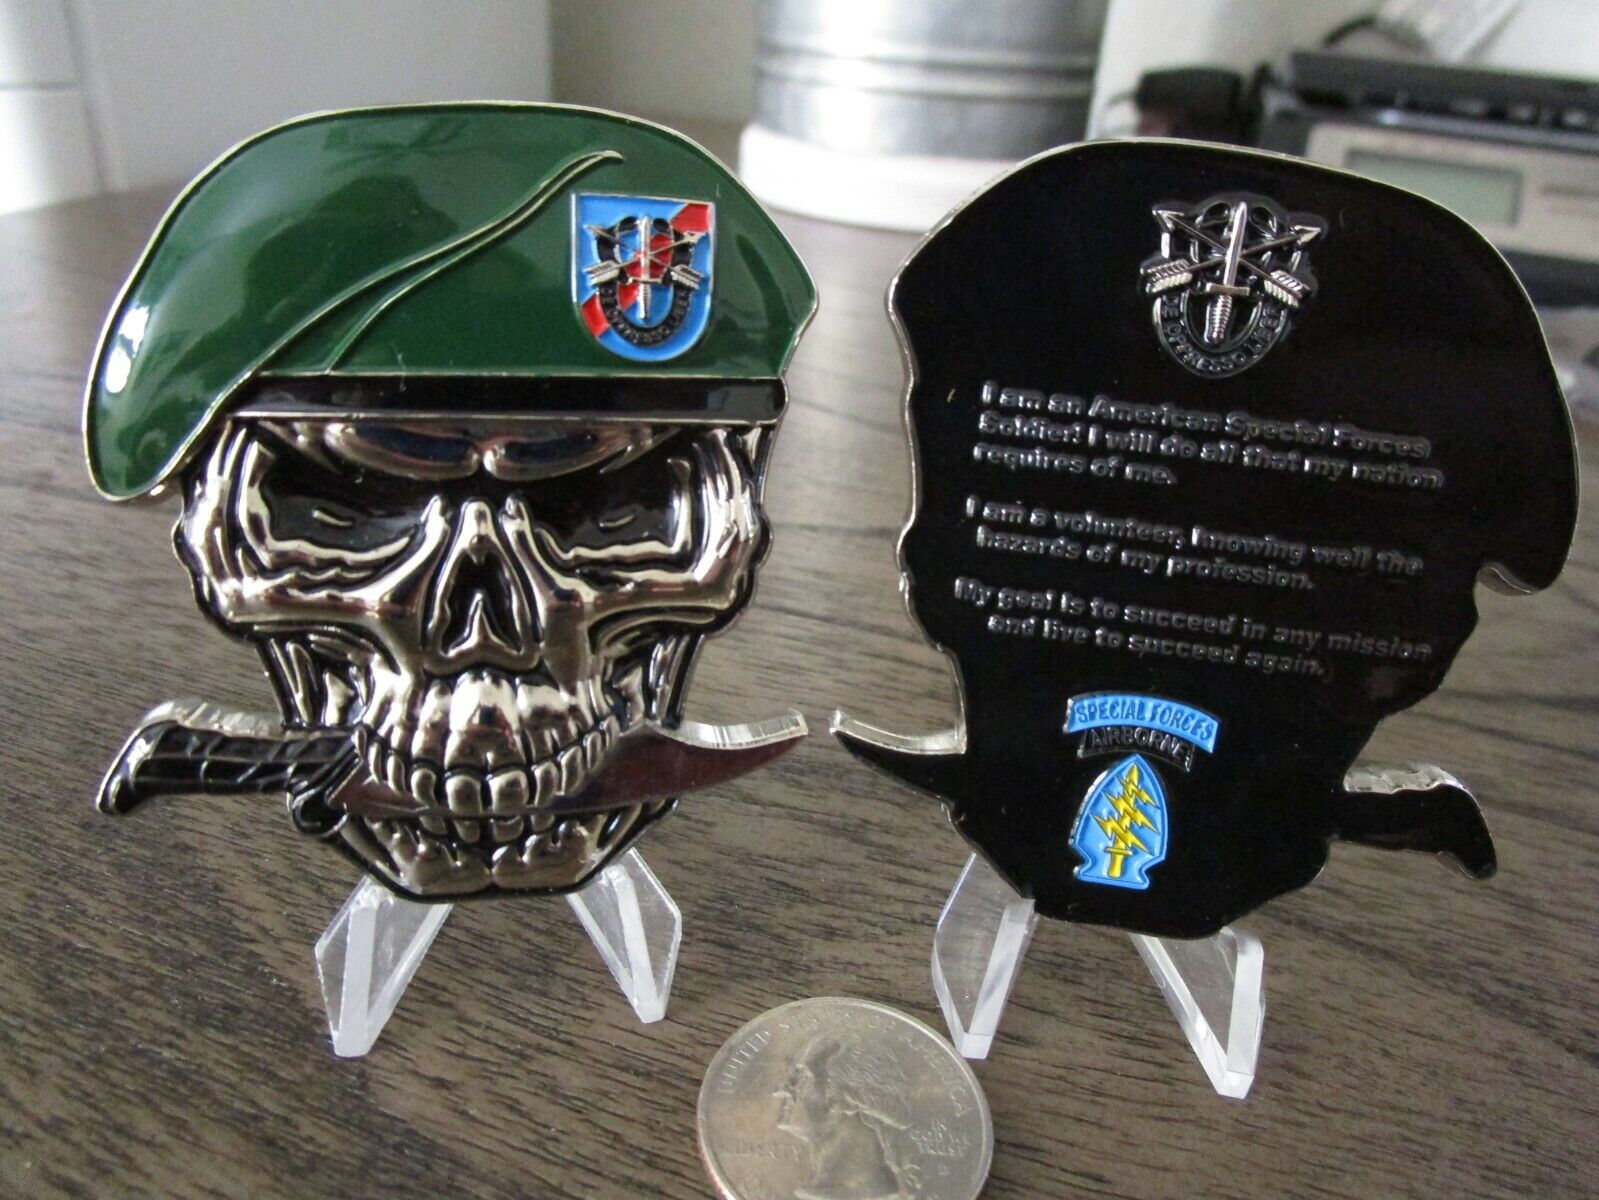 US Army 20th SFG(A) Special Forces Group Creed Green Berets Skull Challenge Coin